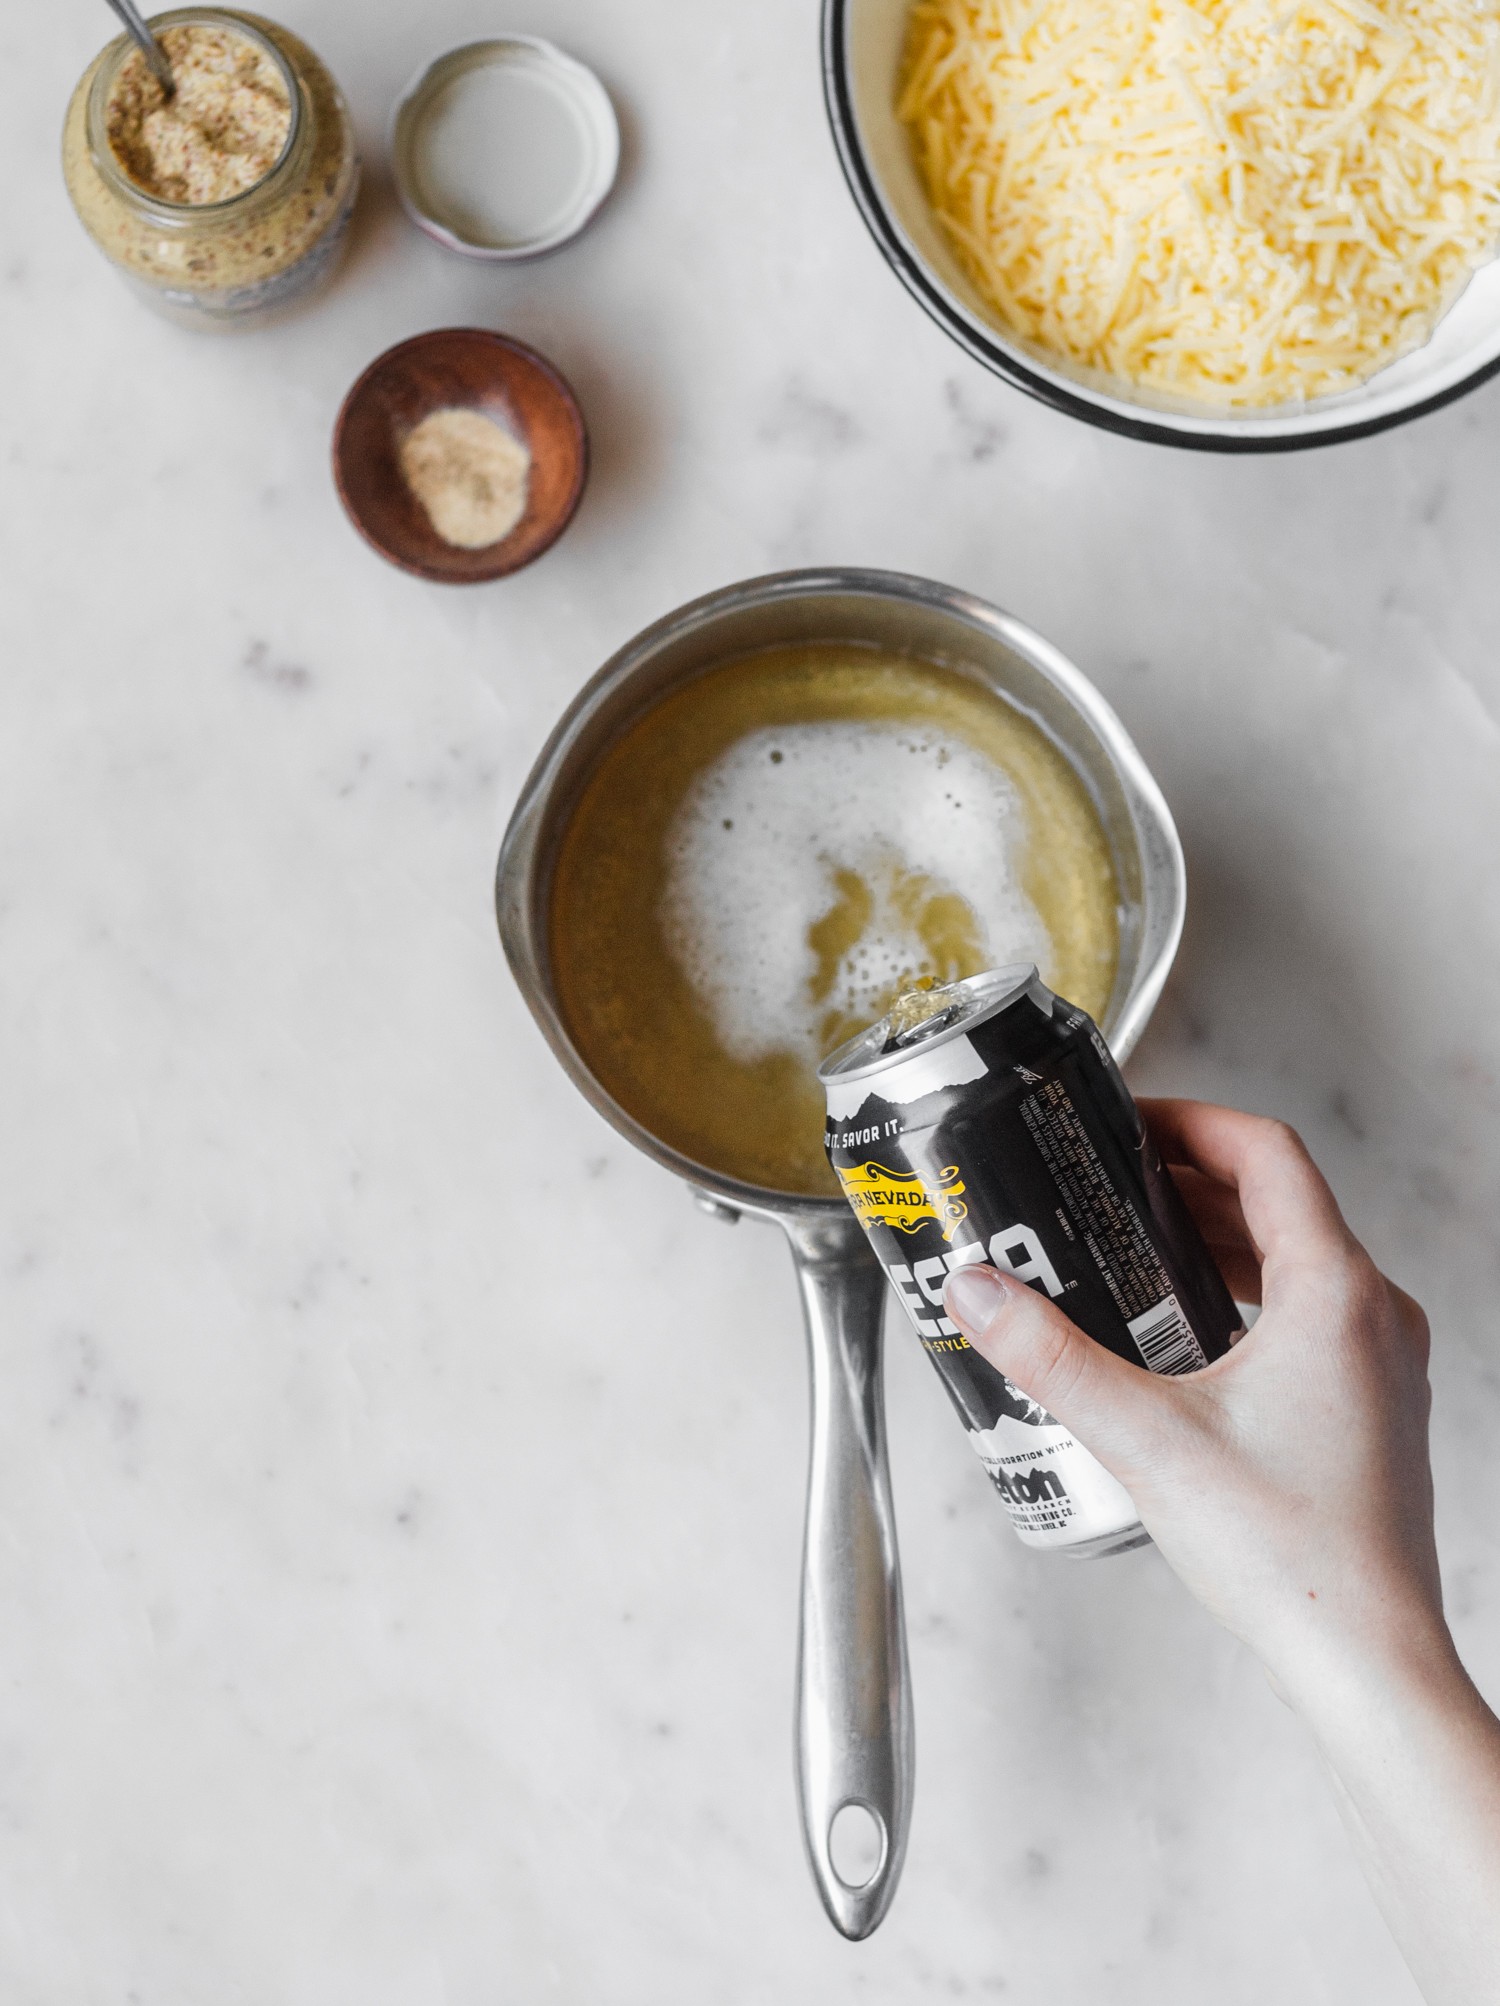 A woman's hand pouring a can of beer into a saucepan placed on a white background. Cheddar cheese, mustard, and spices are surrounding the pan.